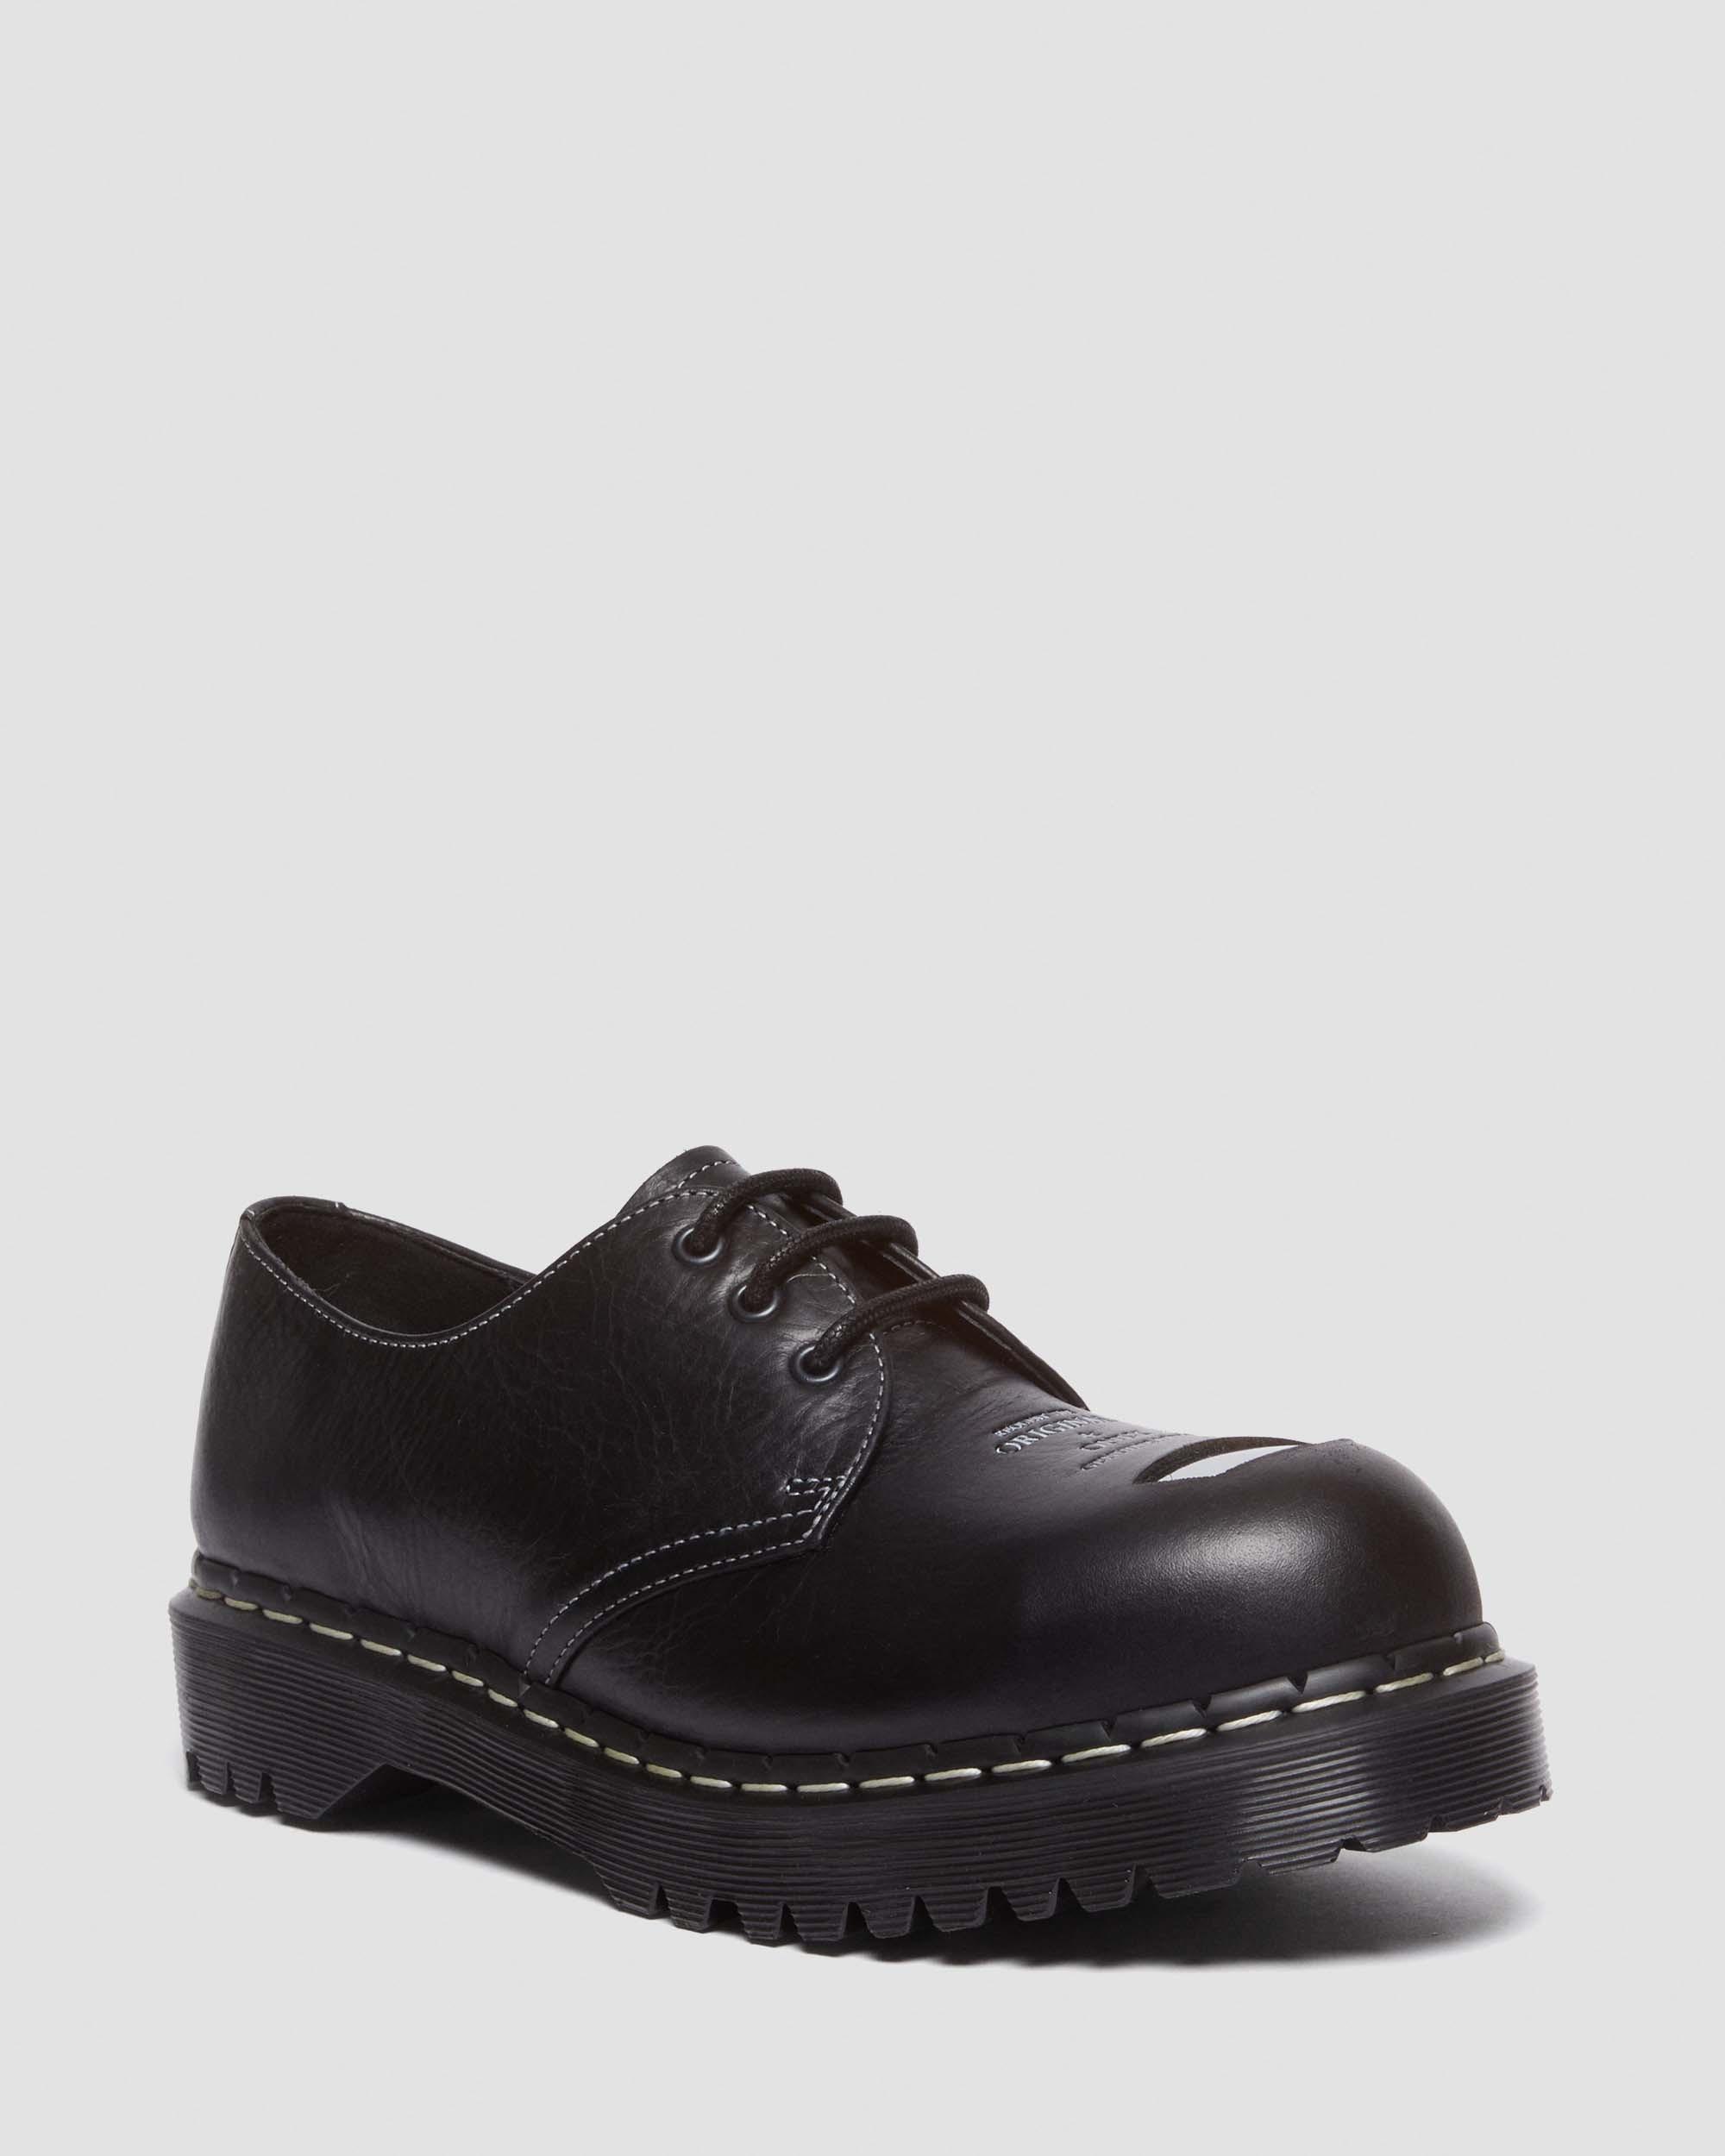 1461 Bex Steel Toe Leather Oxford Shoes